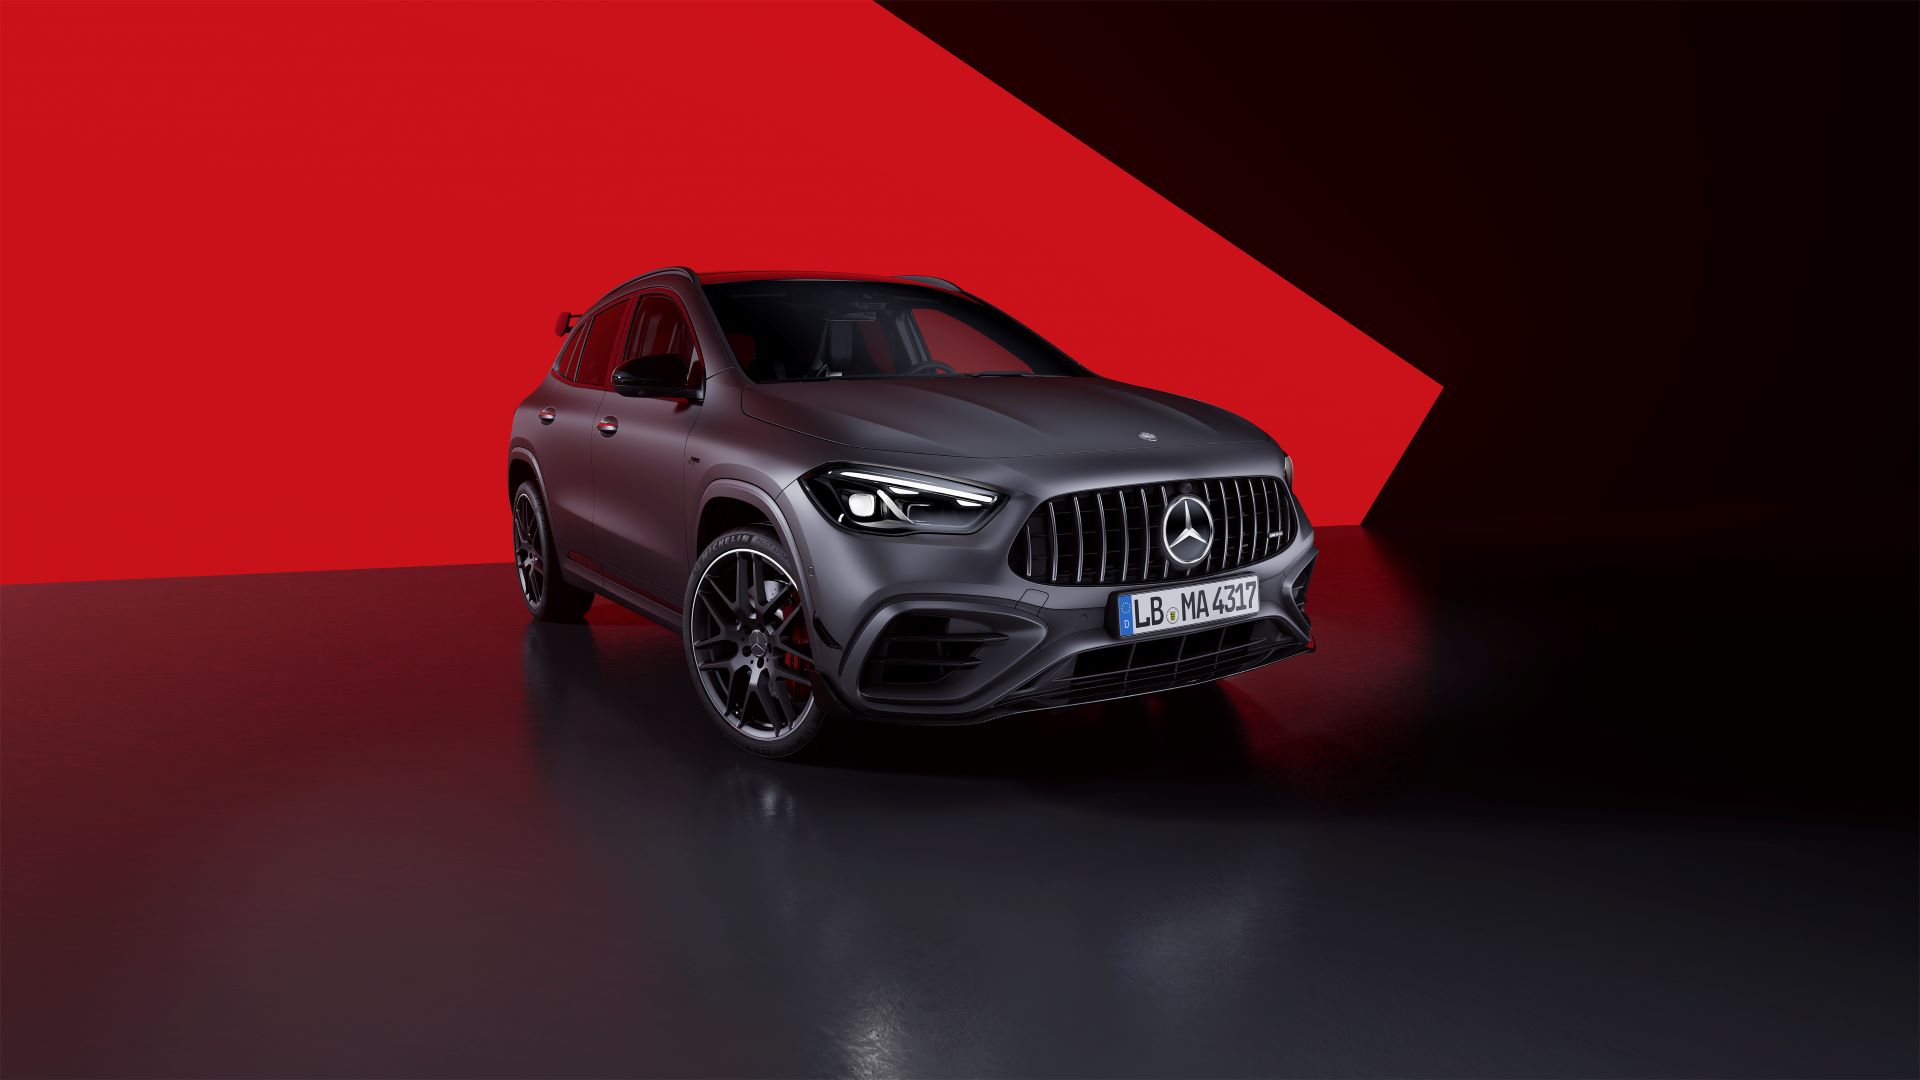 Mercedes-AMG gives top model of its compact Performance SUV family an extensive upgrade